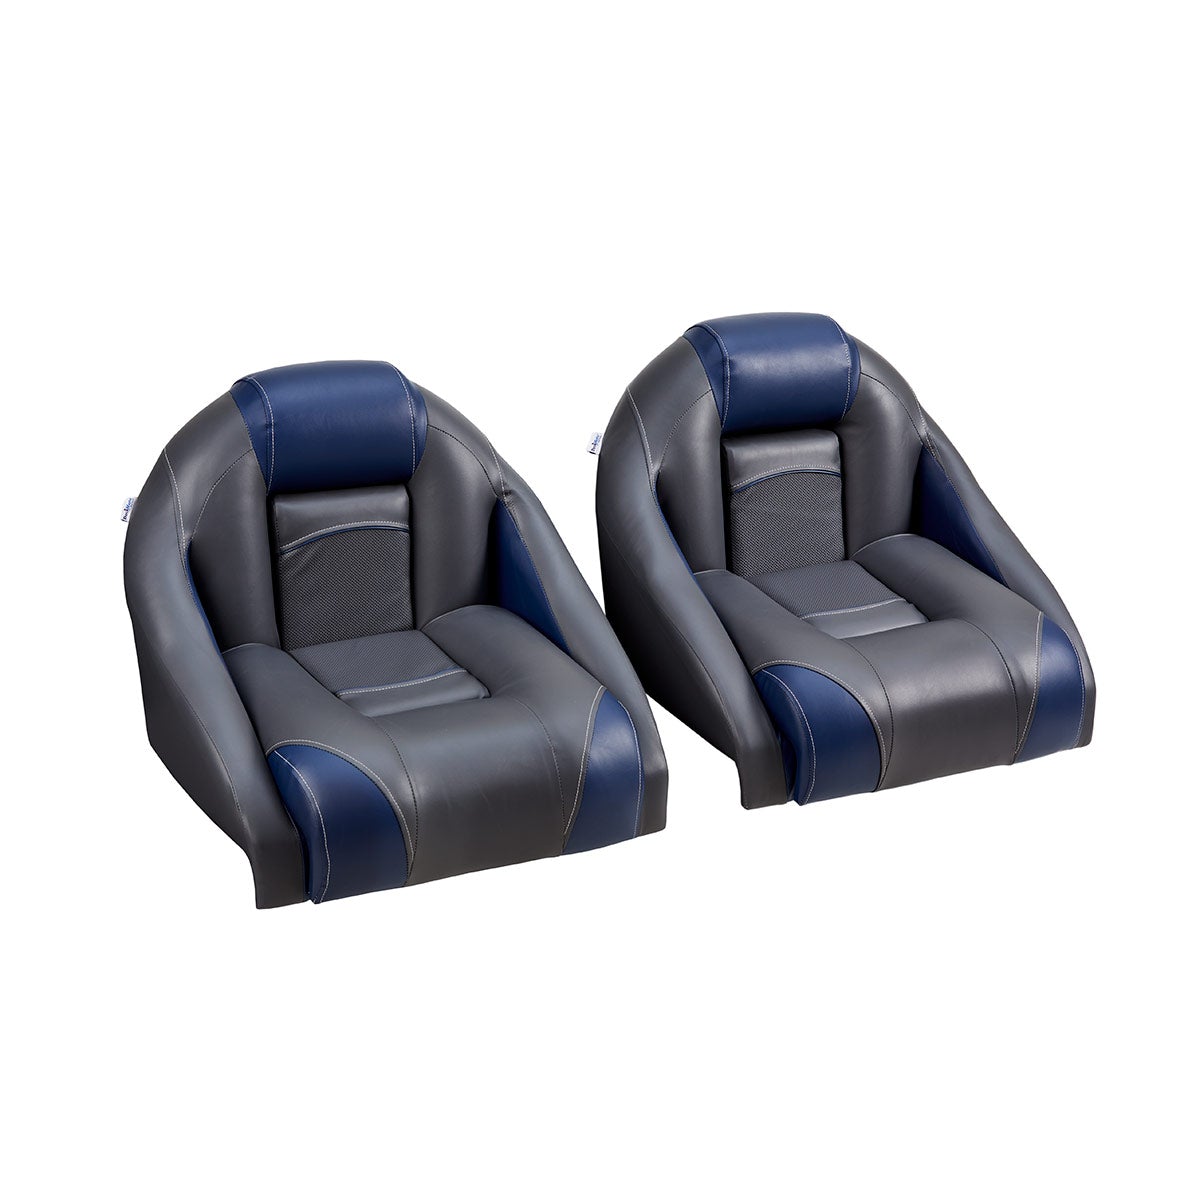 Deckmate 56 Bass Boat SEATS